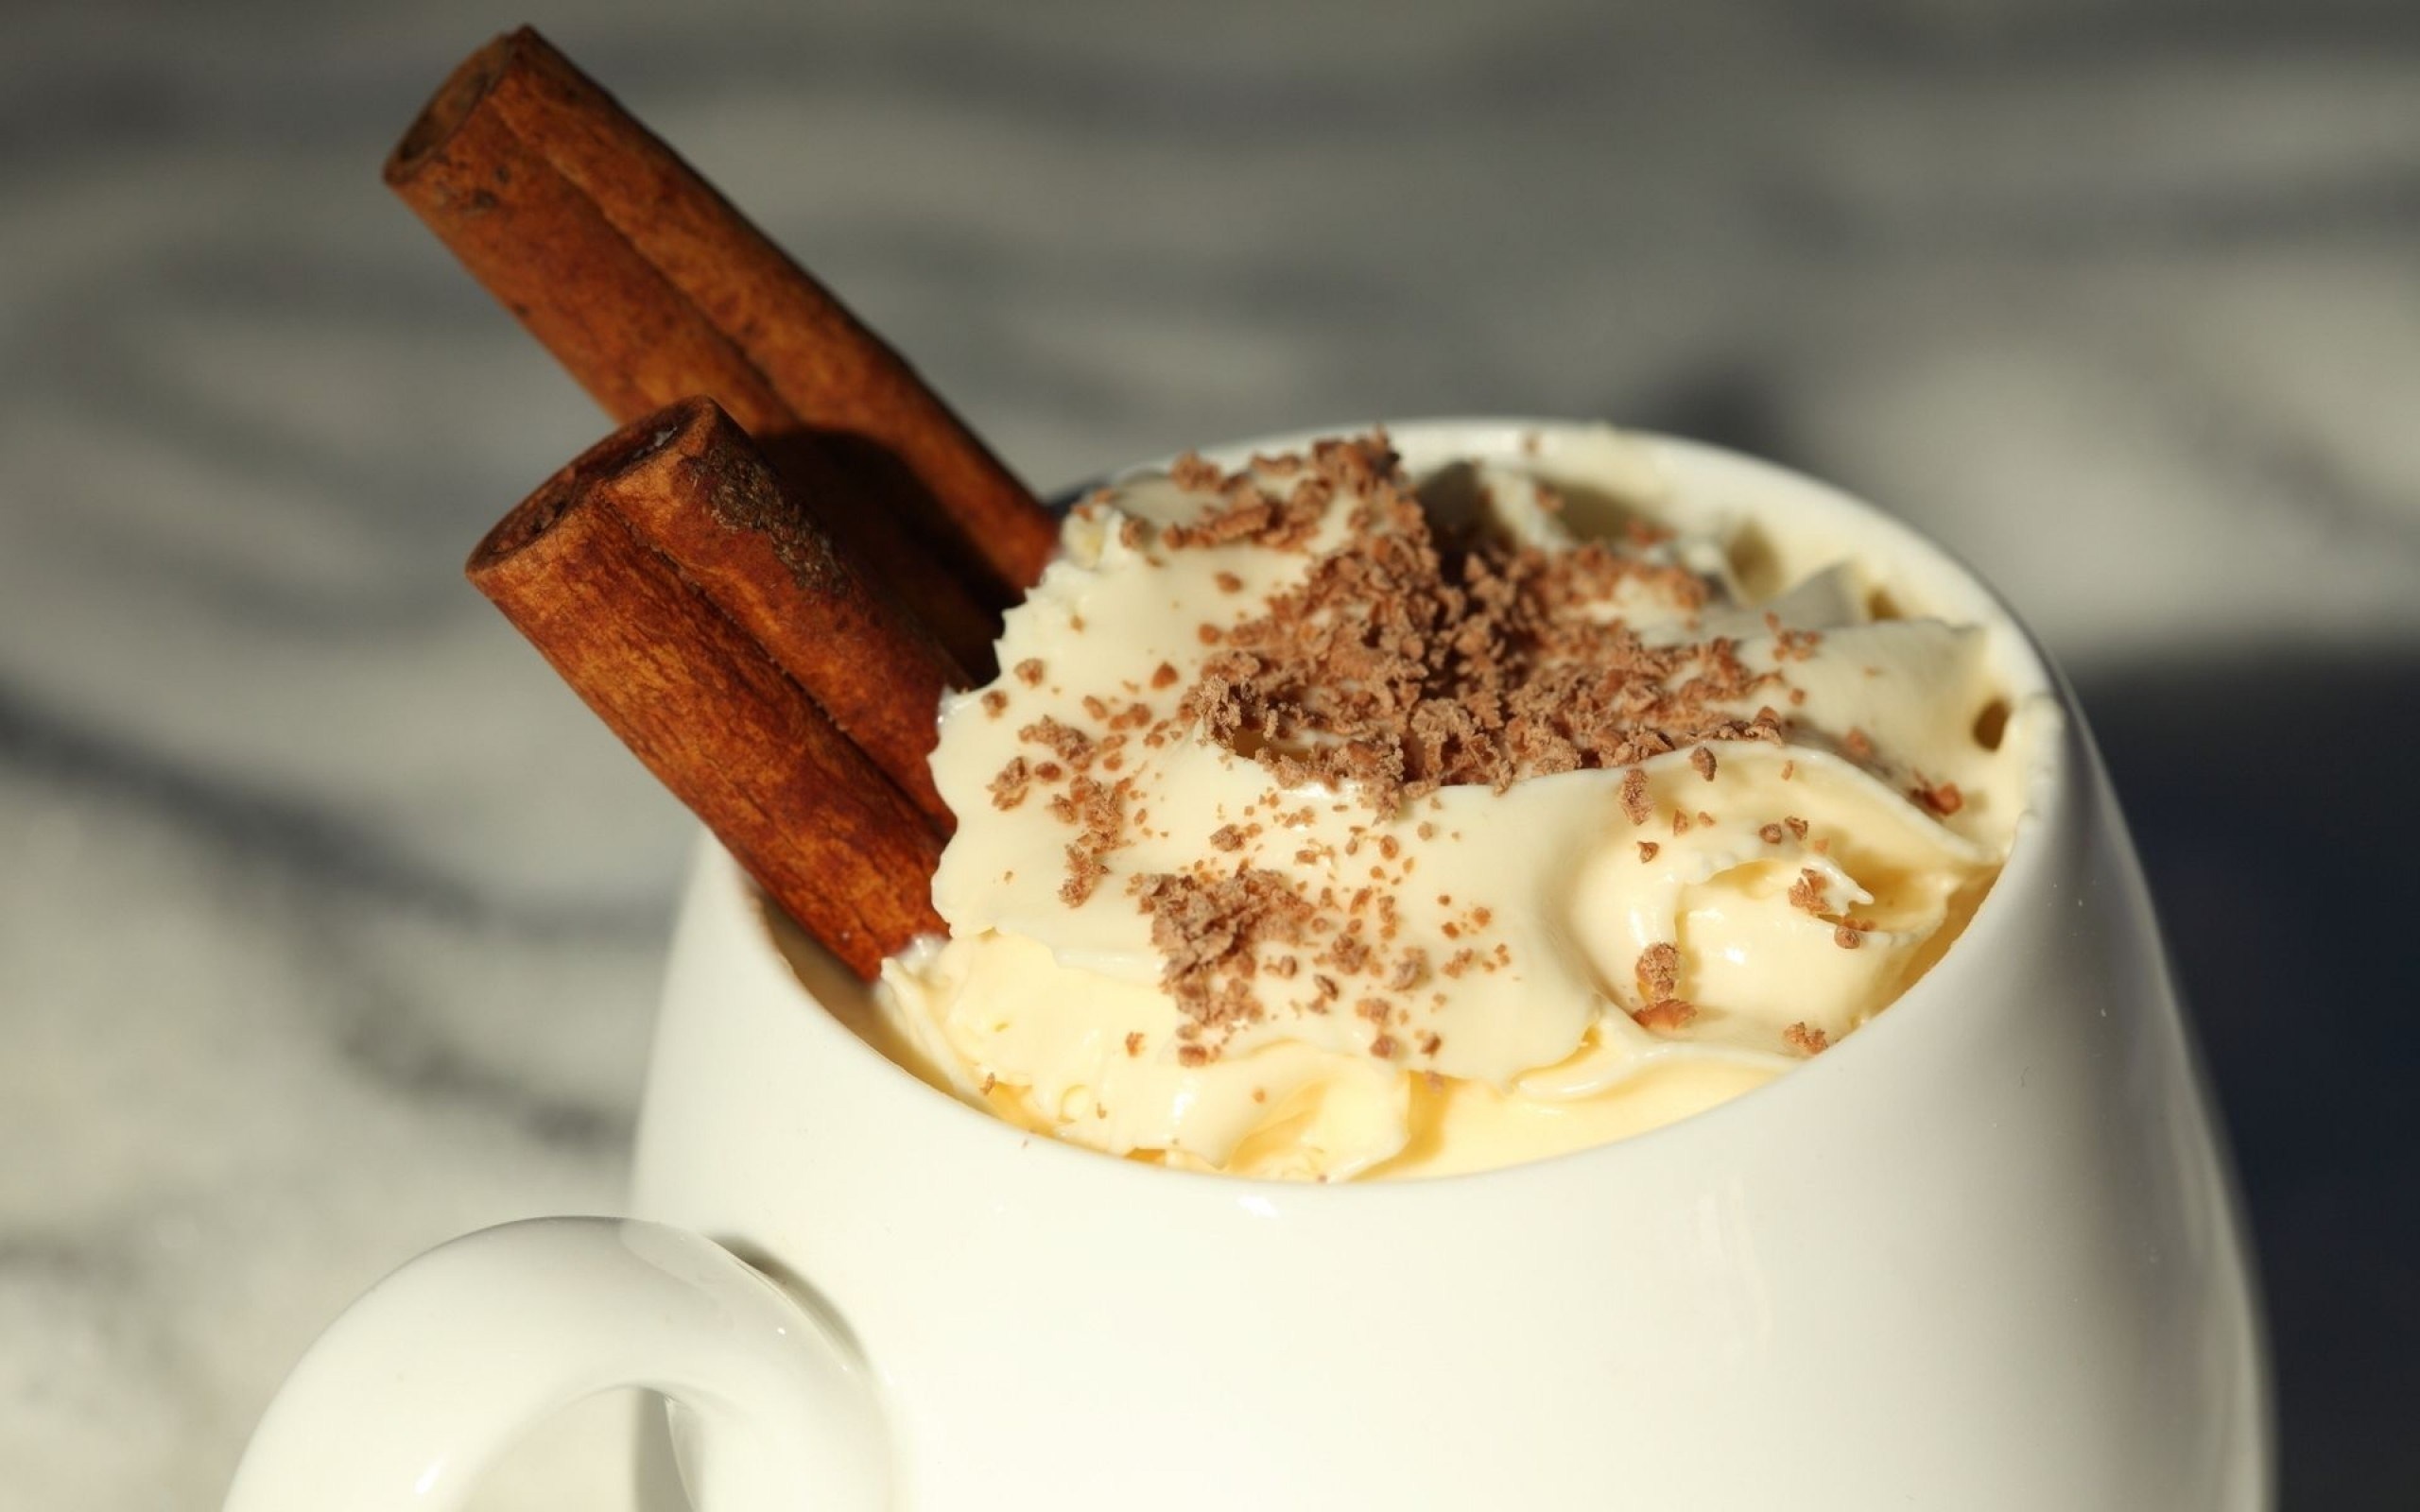 Cappuccino with whip cream, Chocolate-infused delight, Tempting treat, Indulgent delight, 2560x1600 HD Desktop